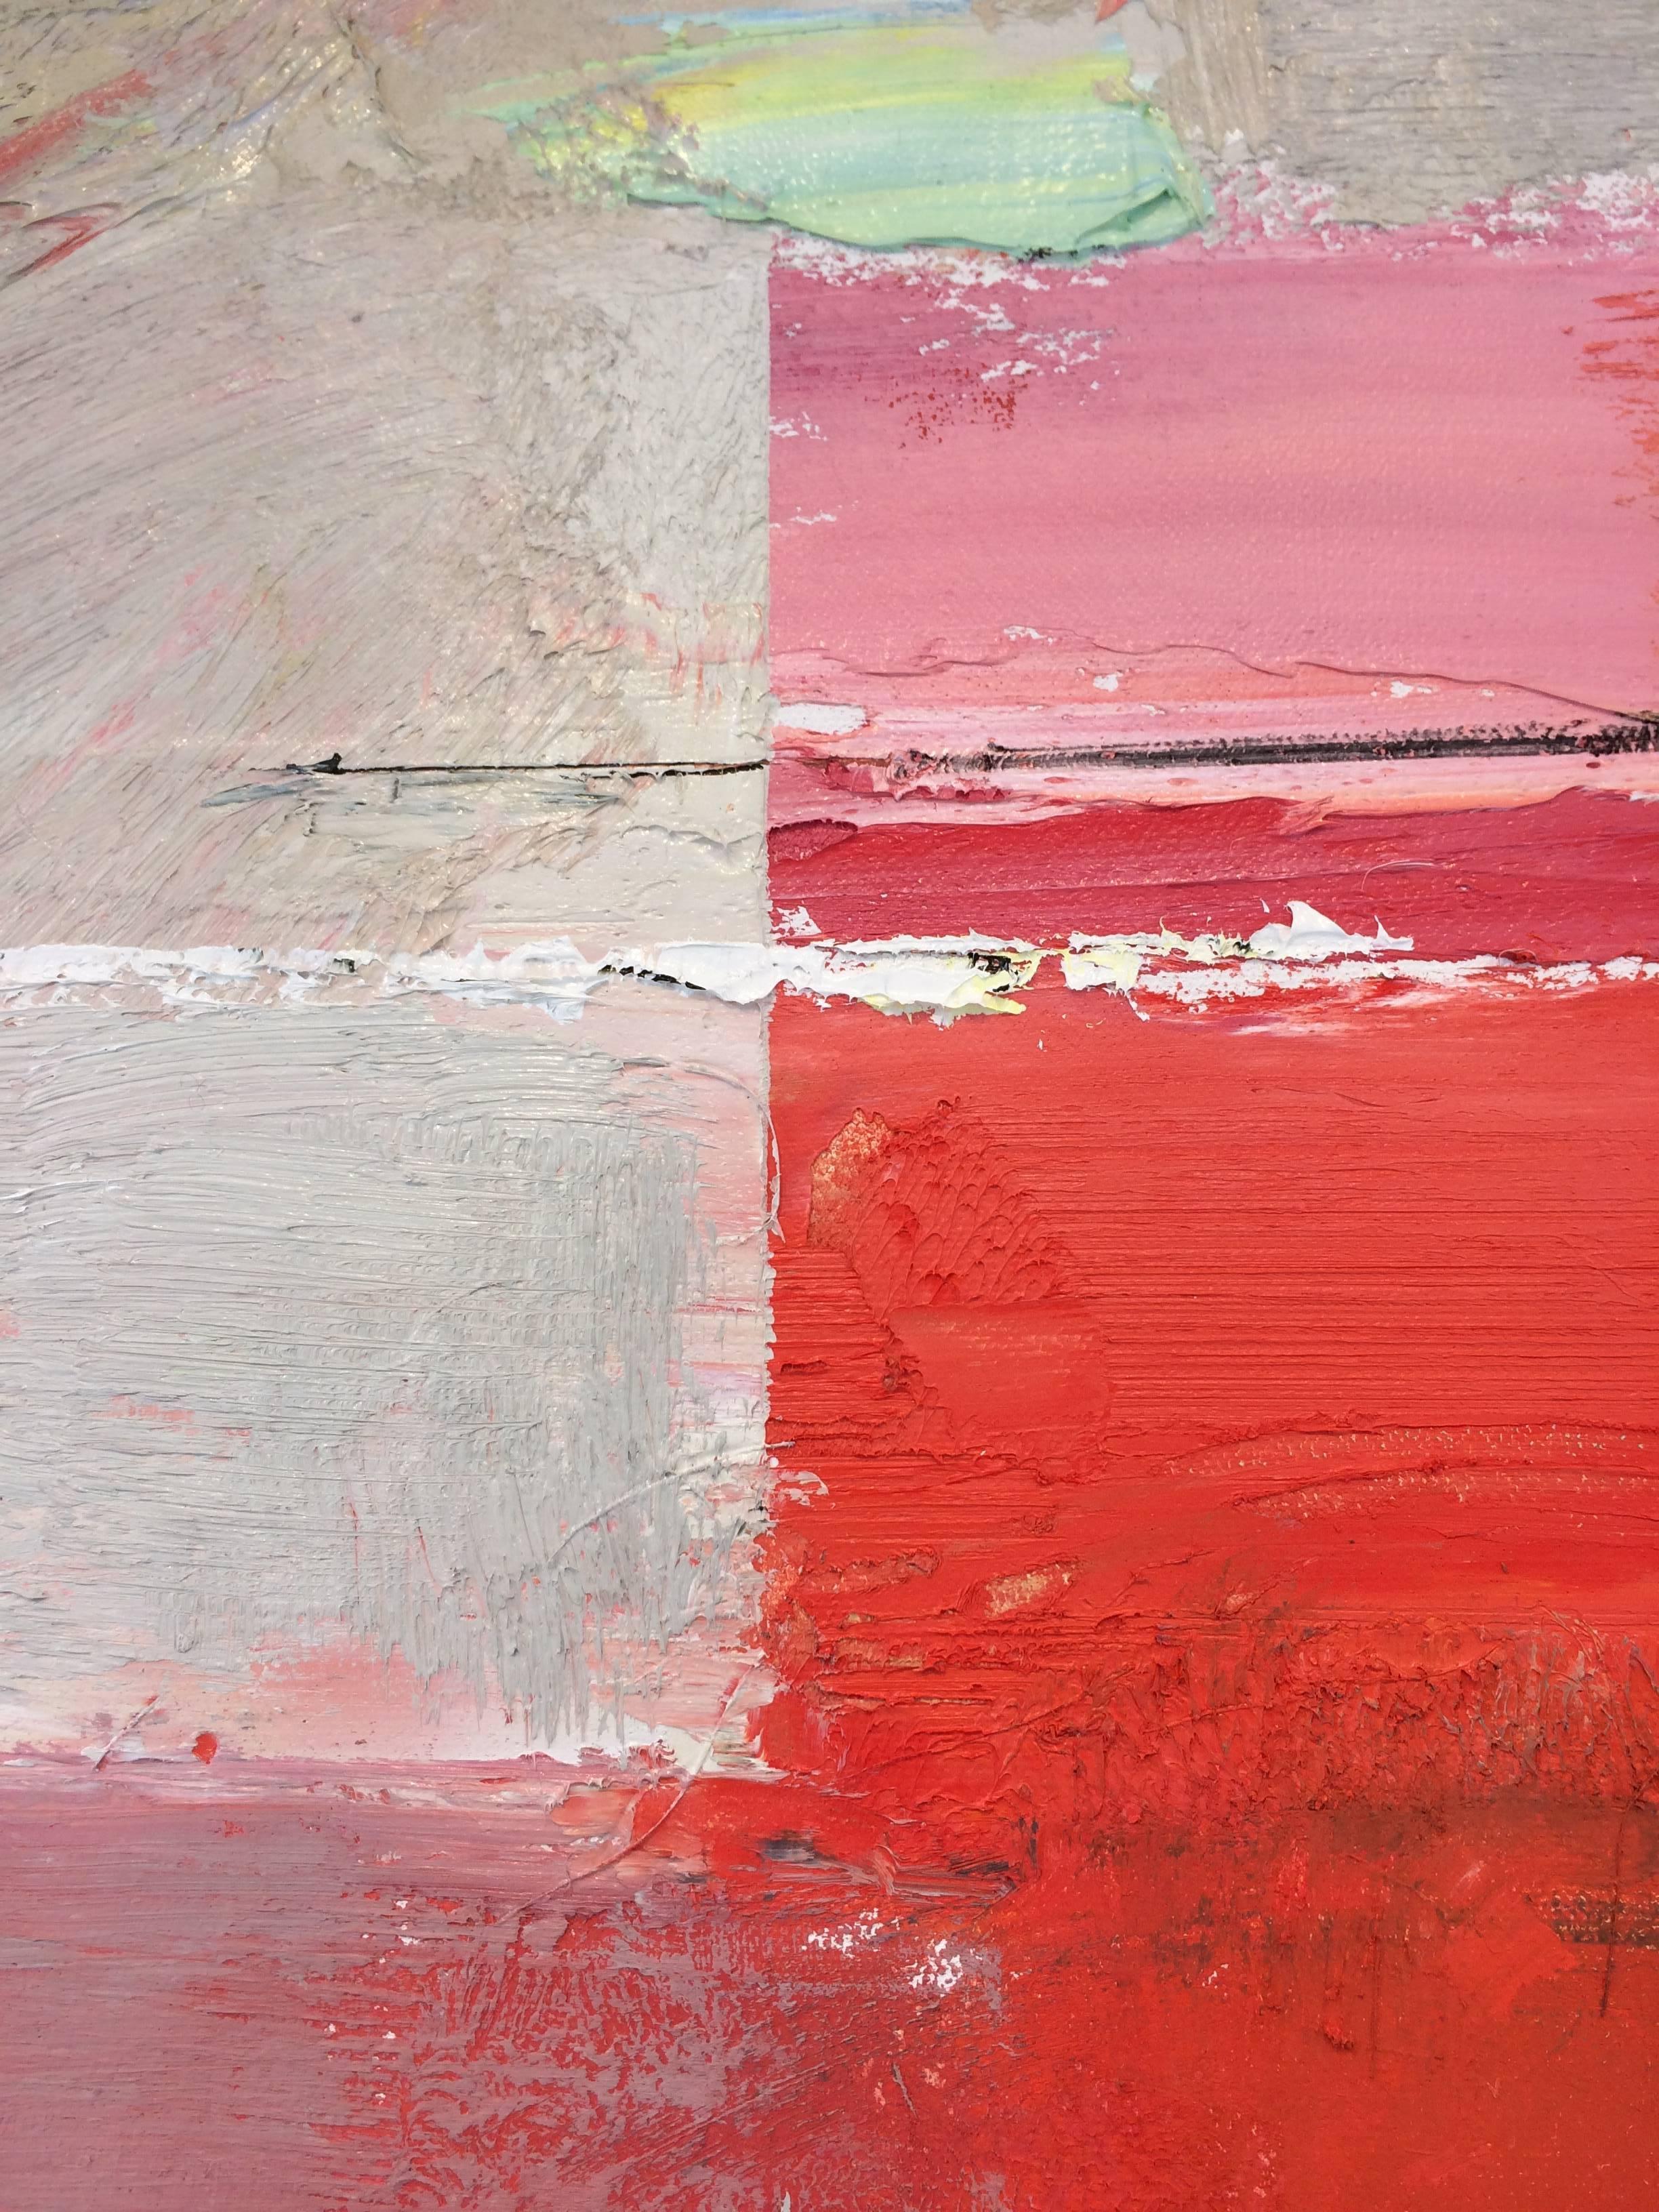 Gratitude In Red - Painting by David Michael Slonim